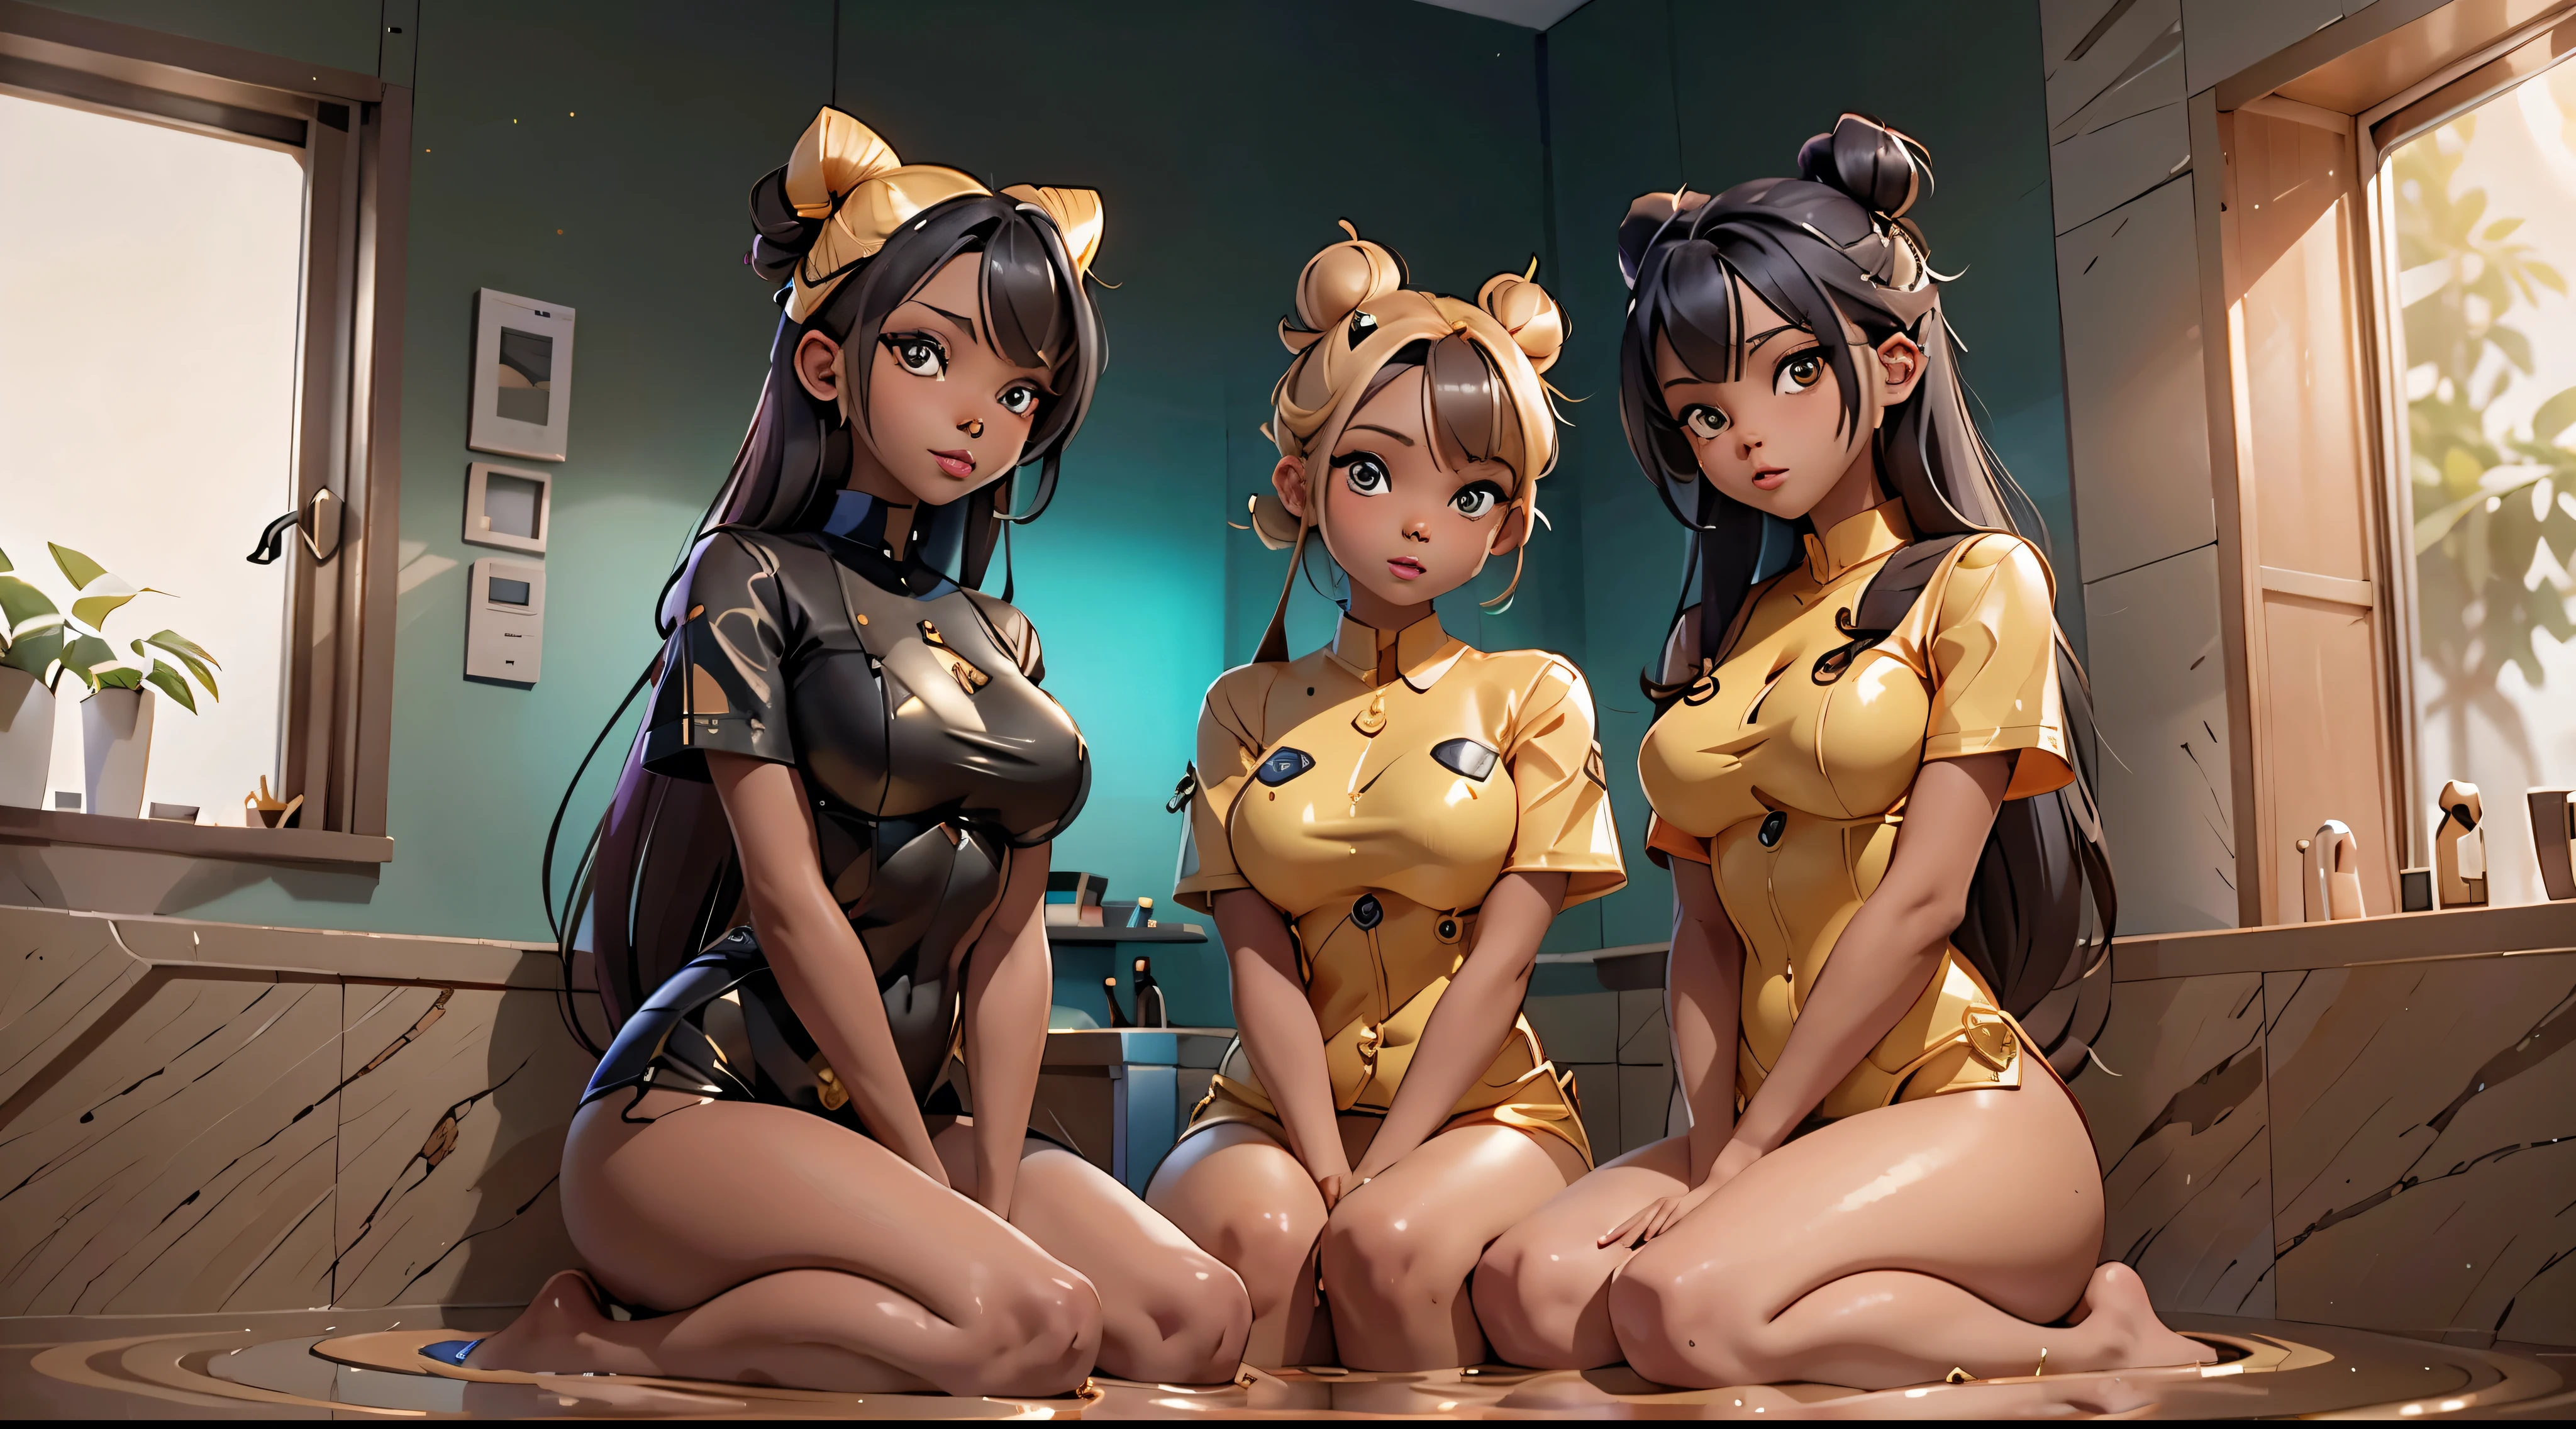 three black women sitting in a bathtub with their hair in buns, loish art style, loish |, stunning art style, afrofuturism anime, full art illustration, rossdraws | afrofuturism, featured art, shining golden hour, bathed in golden light, golden hour, published art, dark-skinned, cute art style, official art